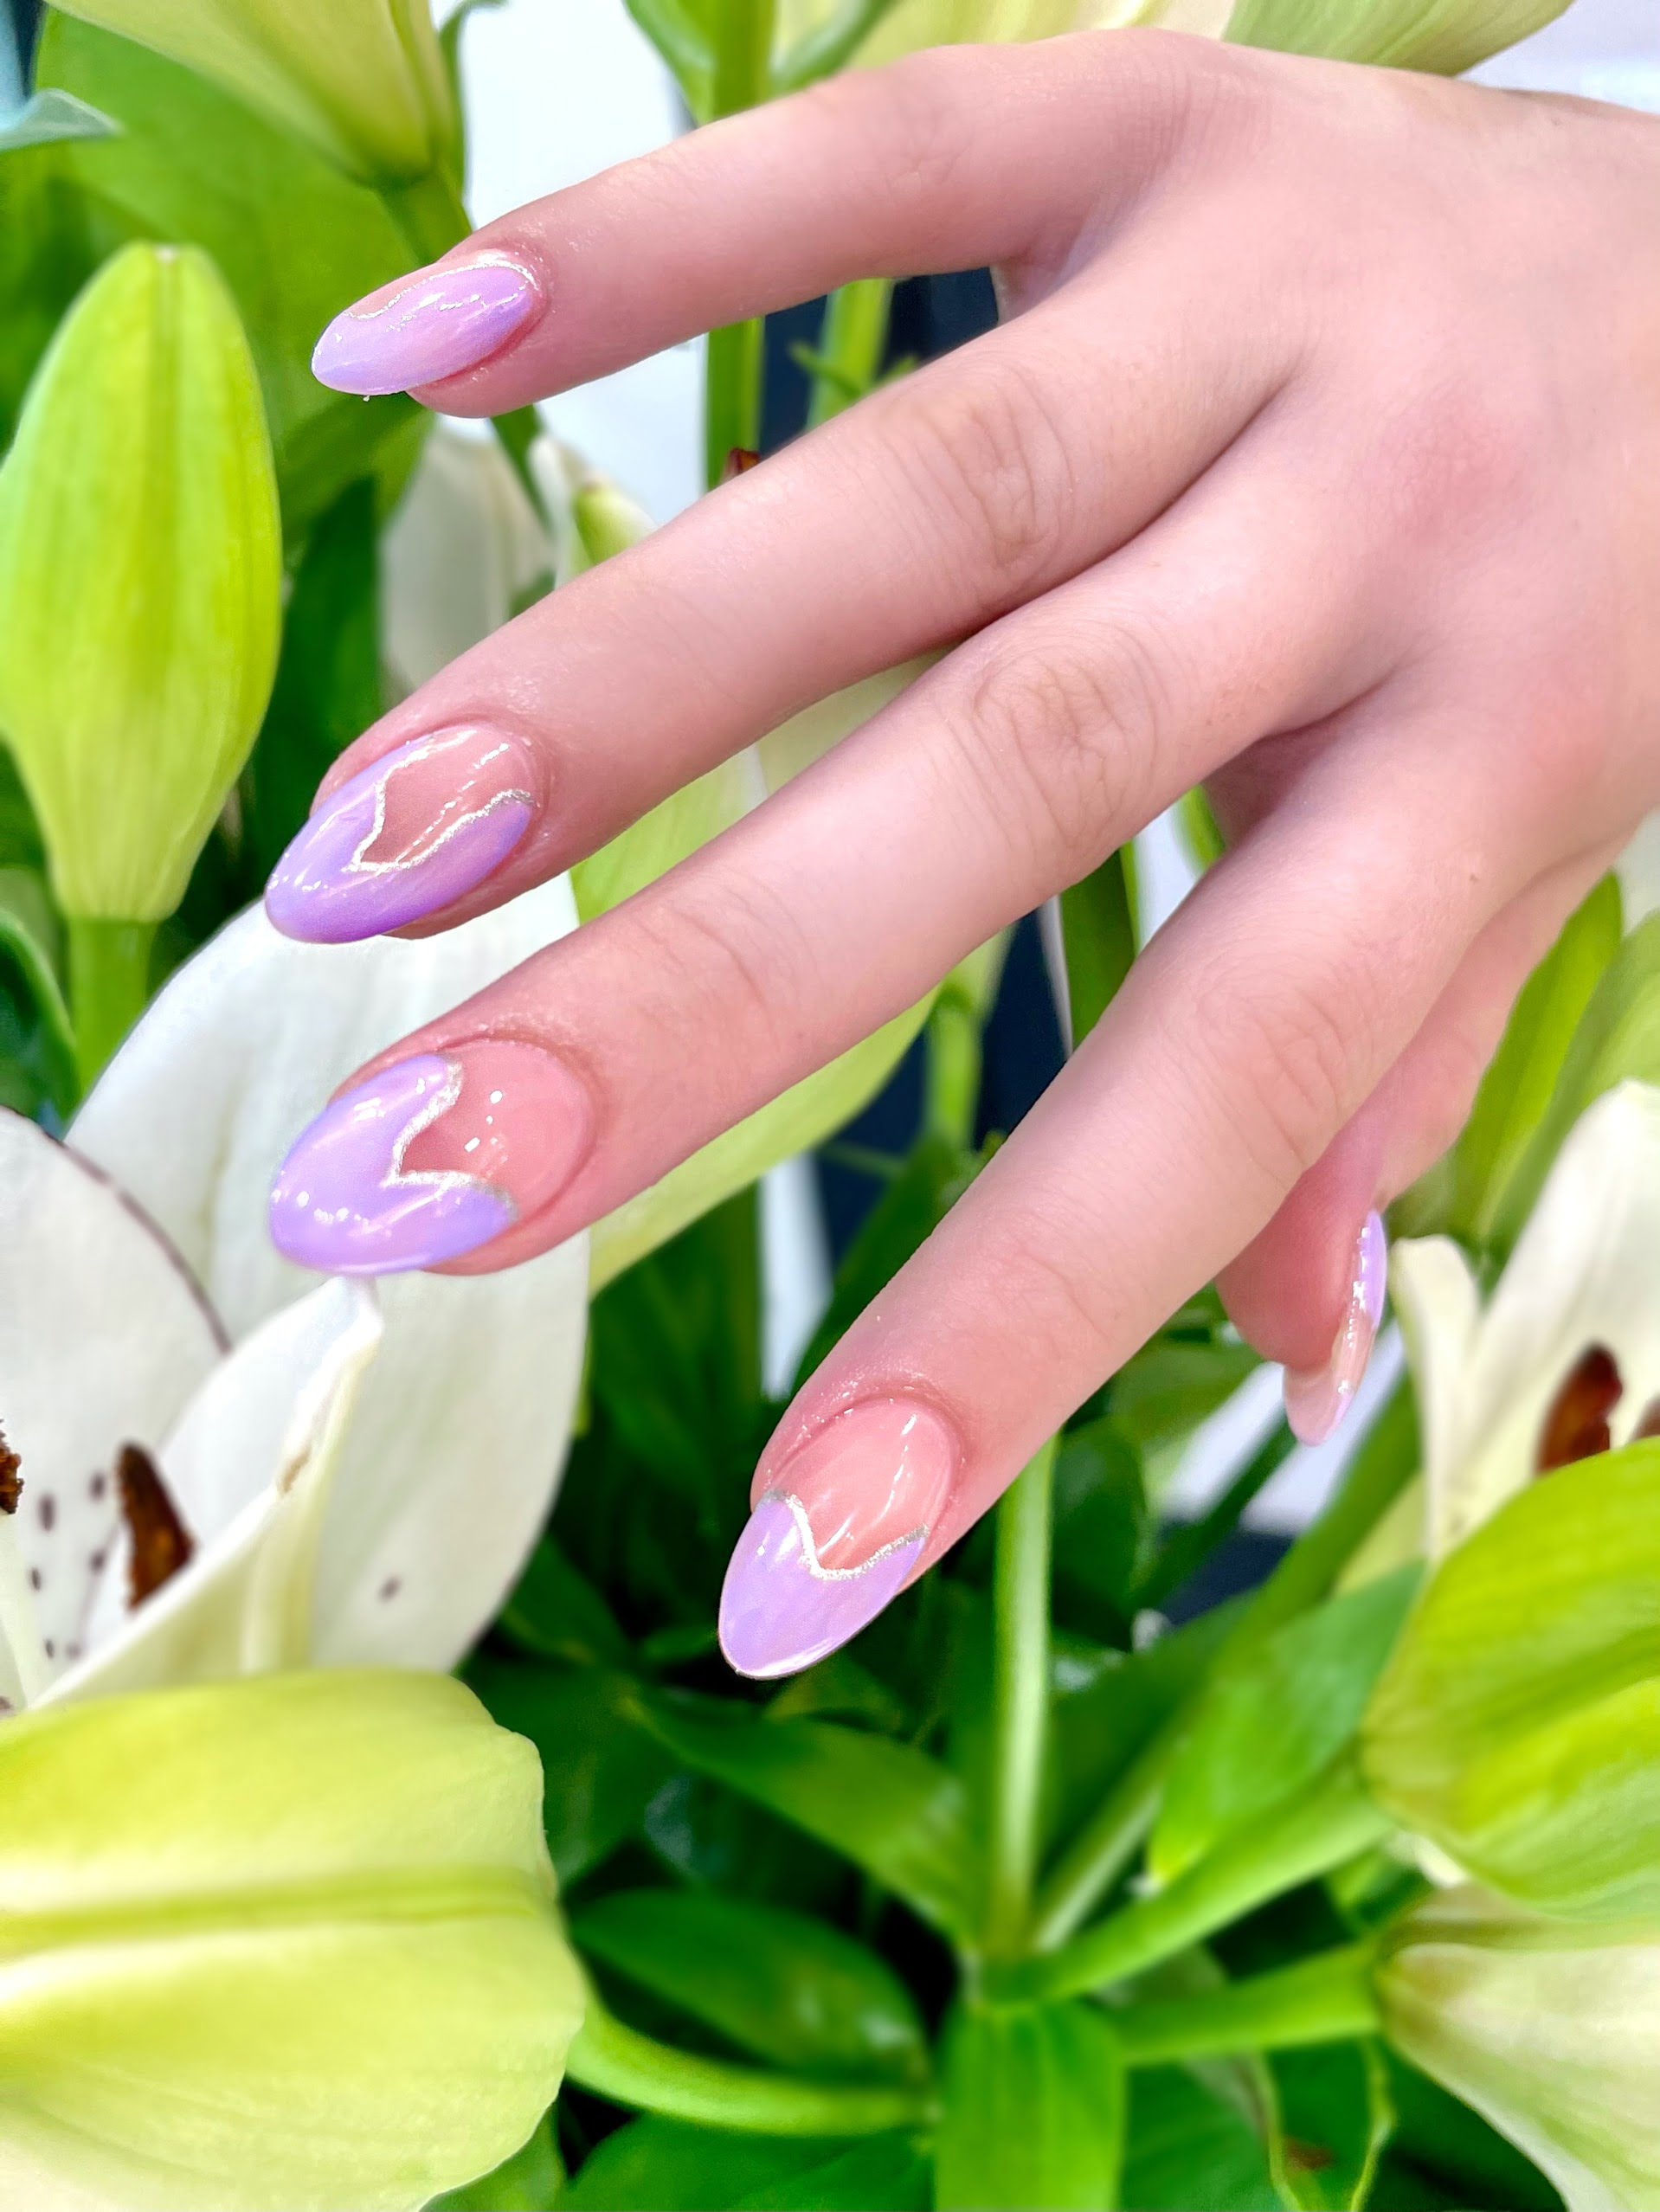 Lavender nail can be a wisely choice